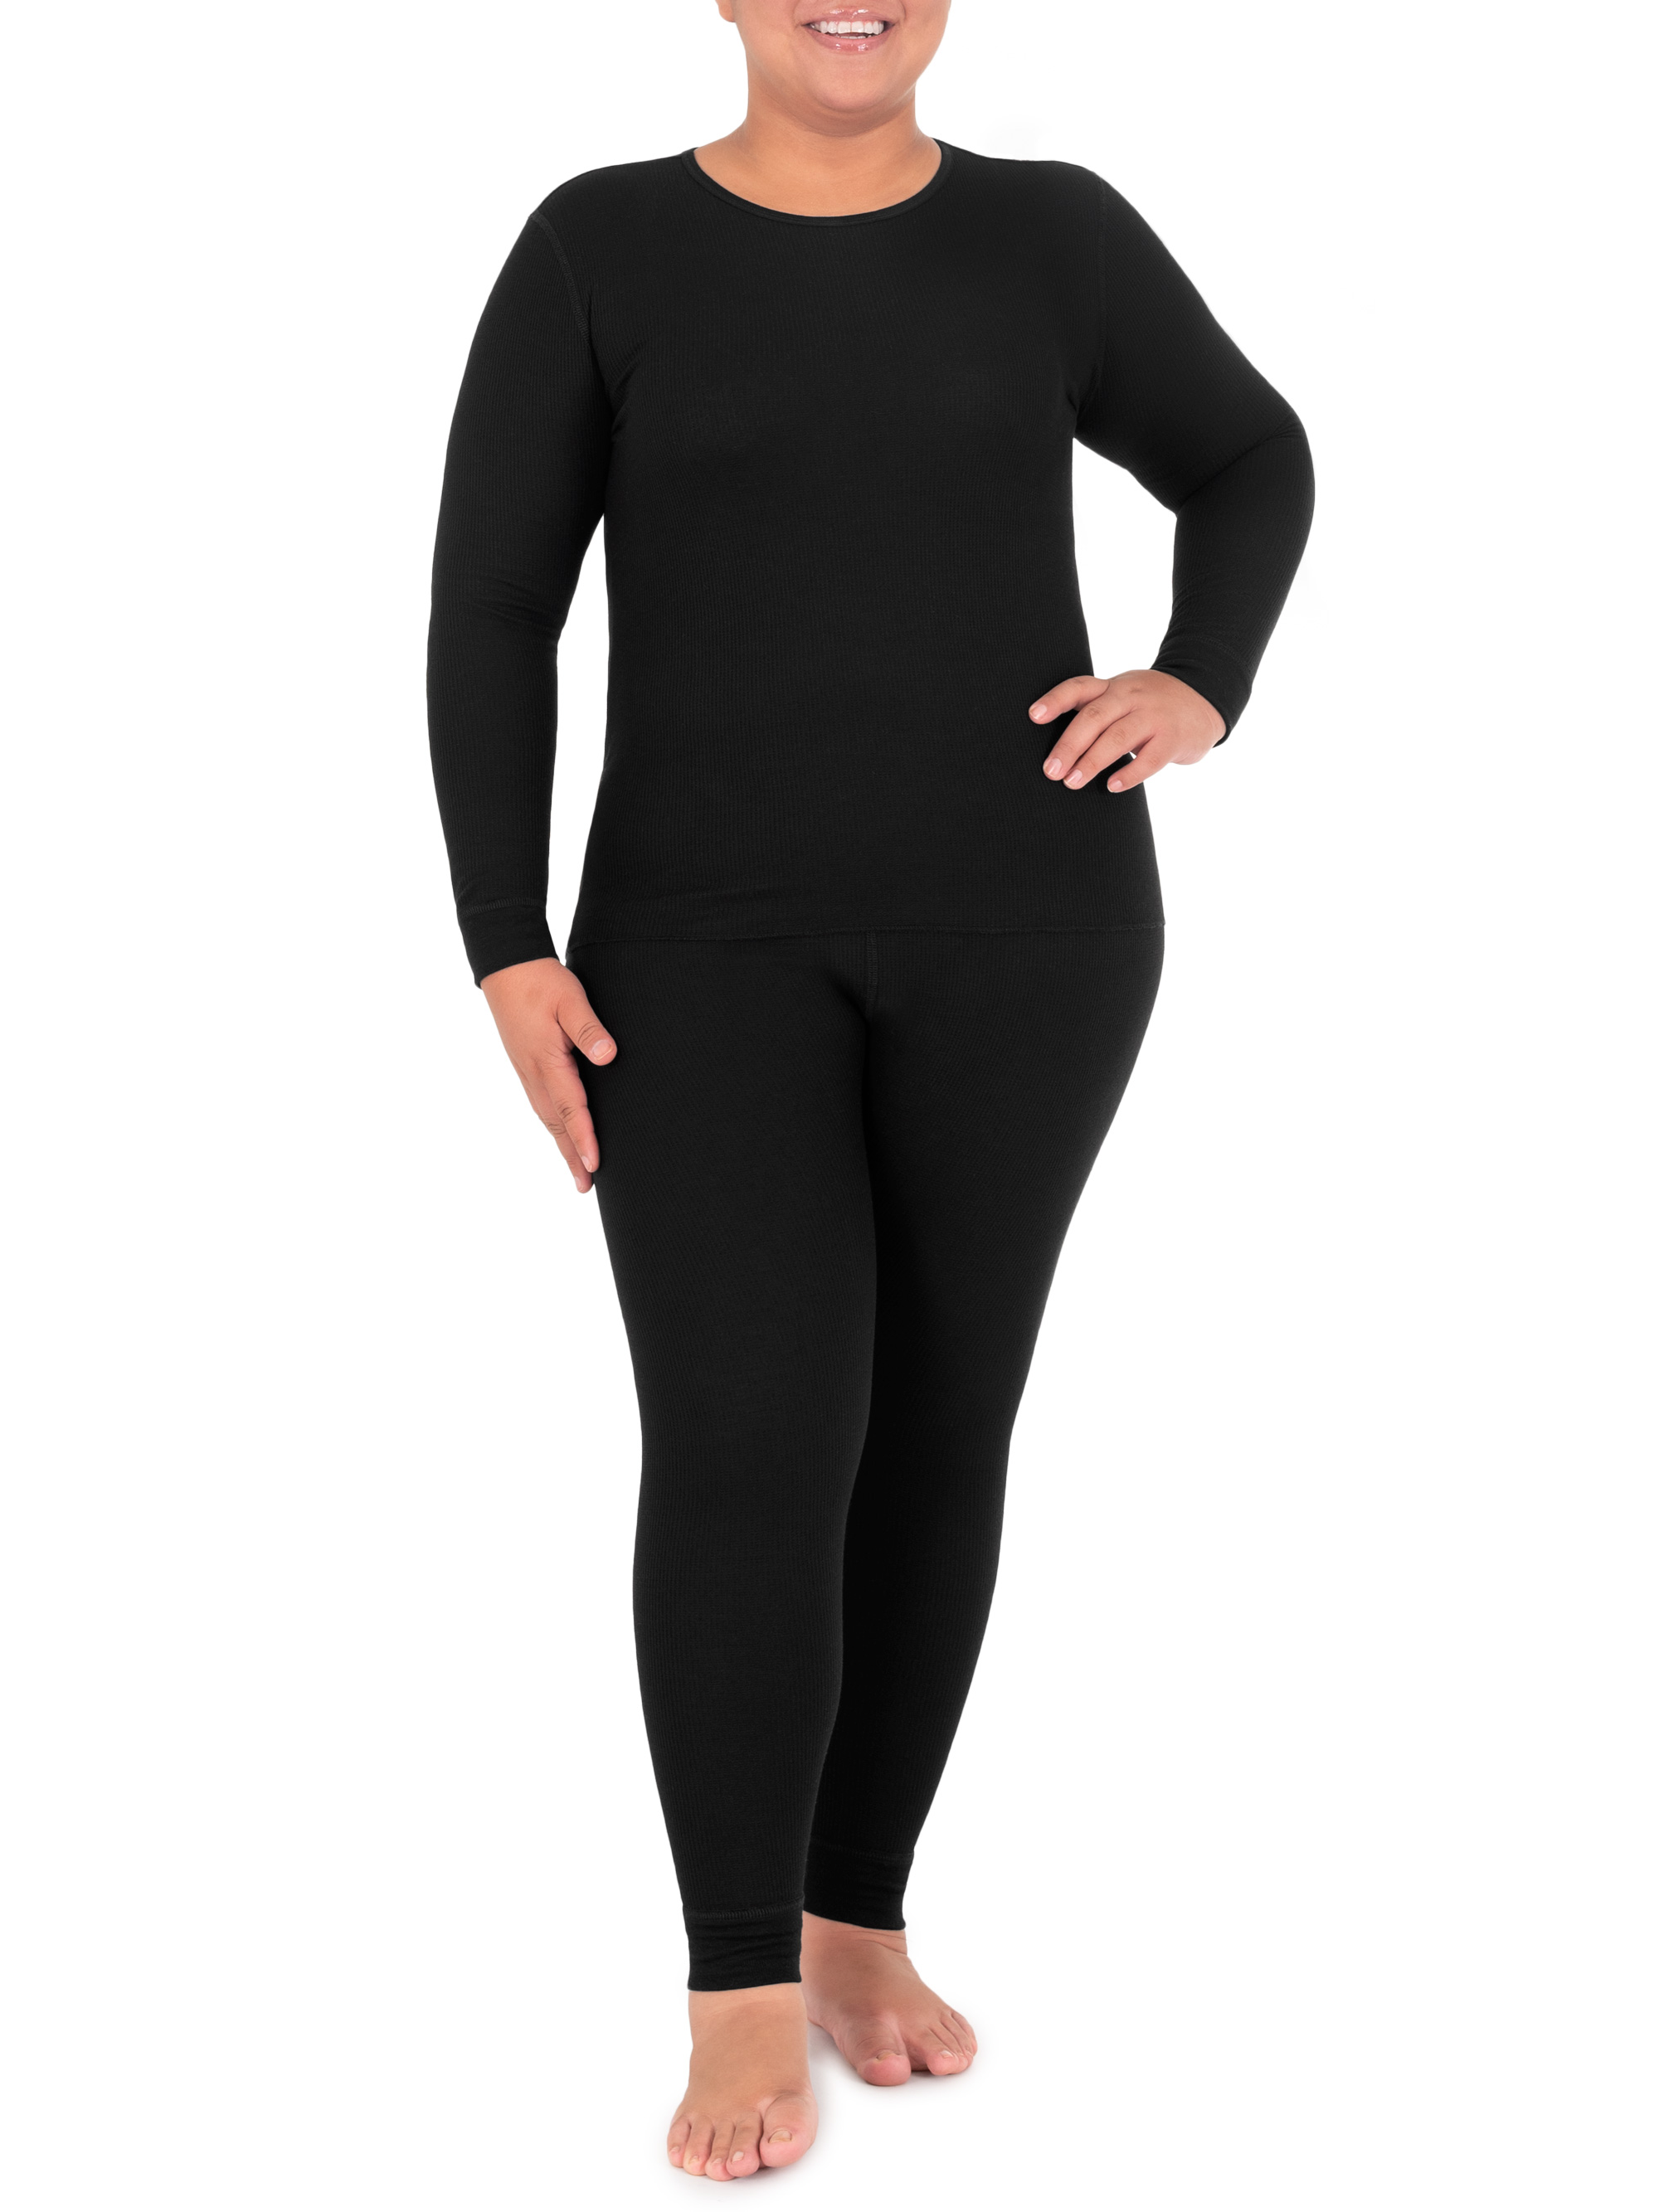 Fruit of the Loom Women's and Women's Plus Long Underwear Thermal Waffle Top and Bottom Set - image 4 of 14